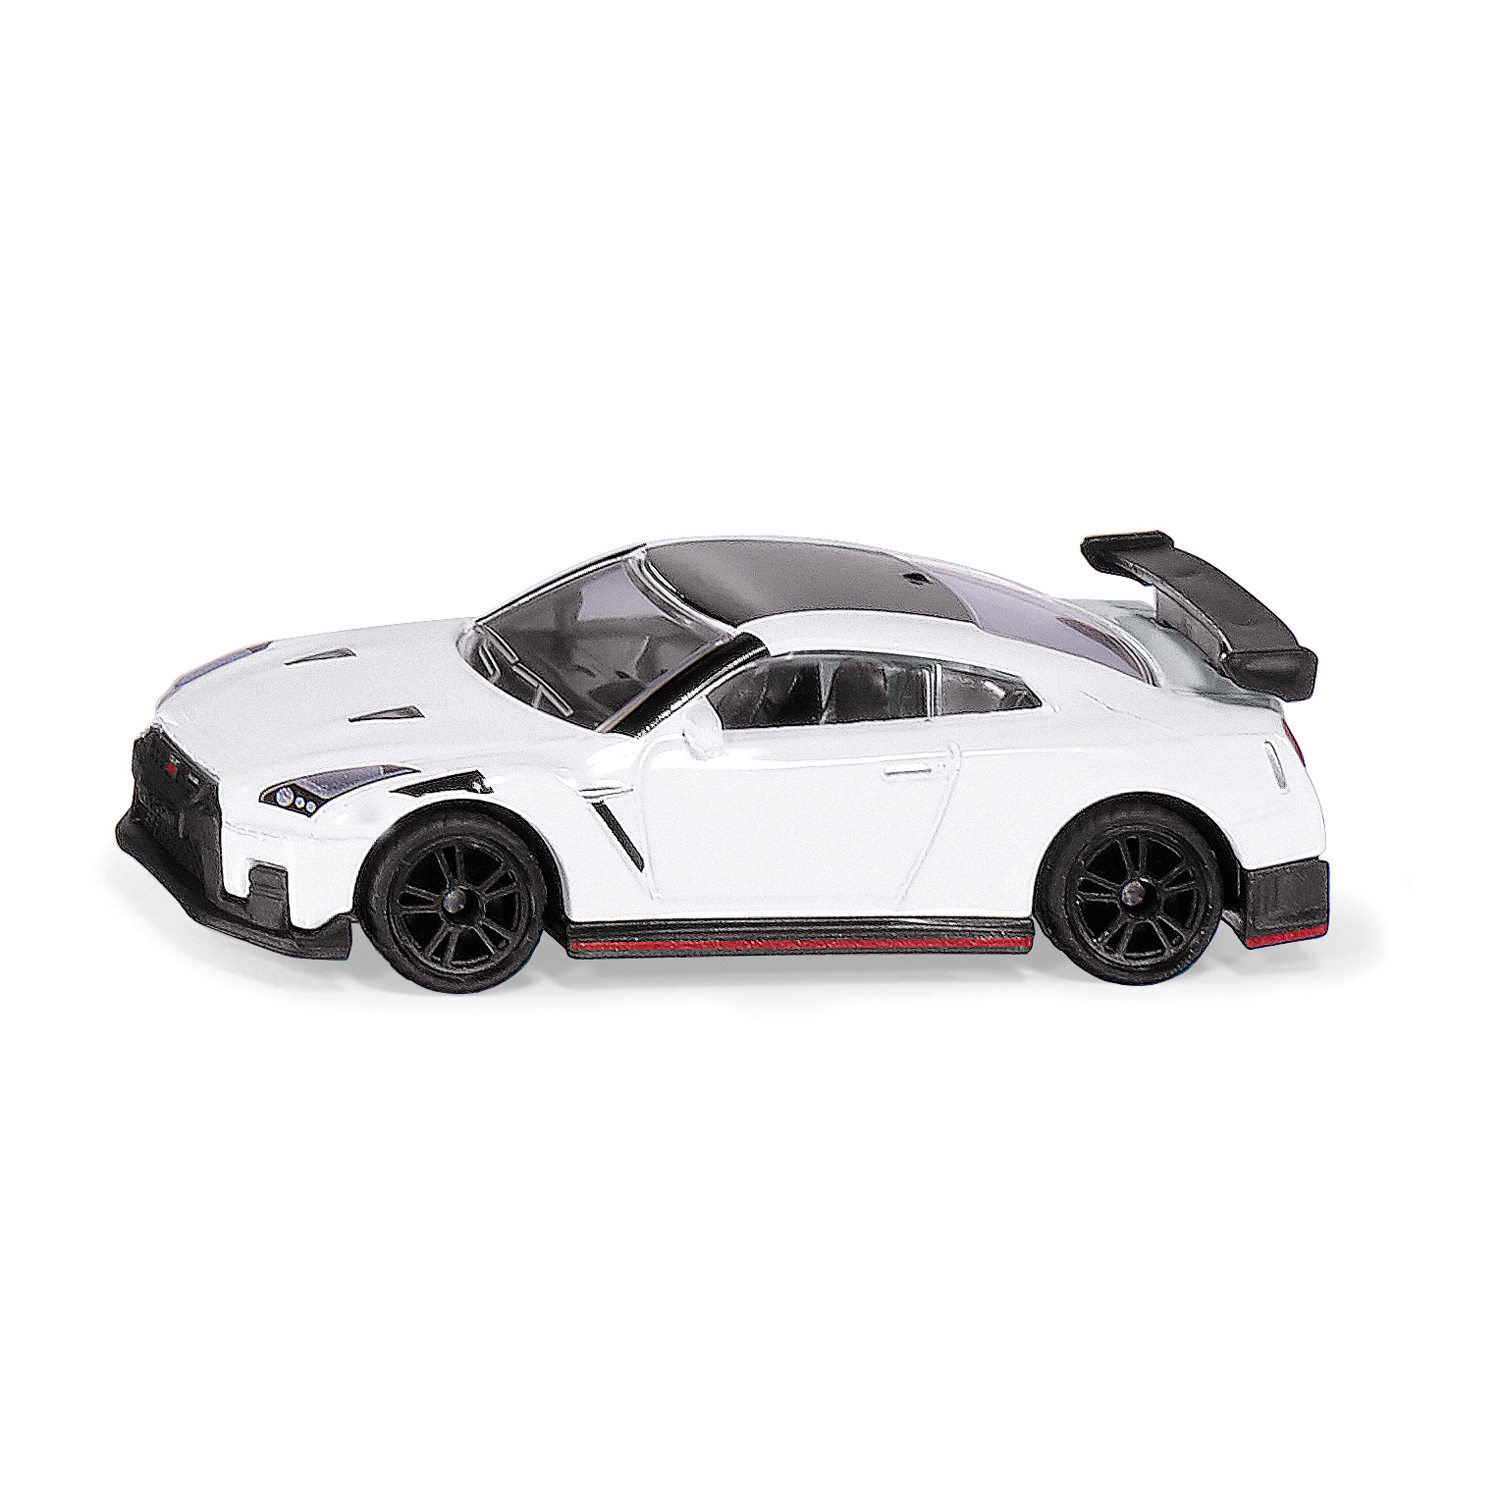 Toy cars nissan gt-r nismo